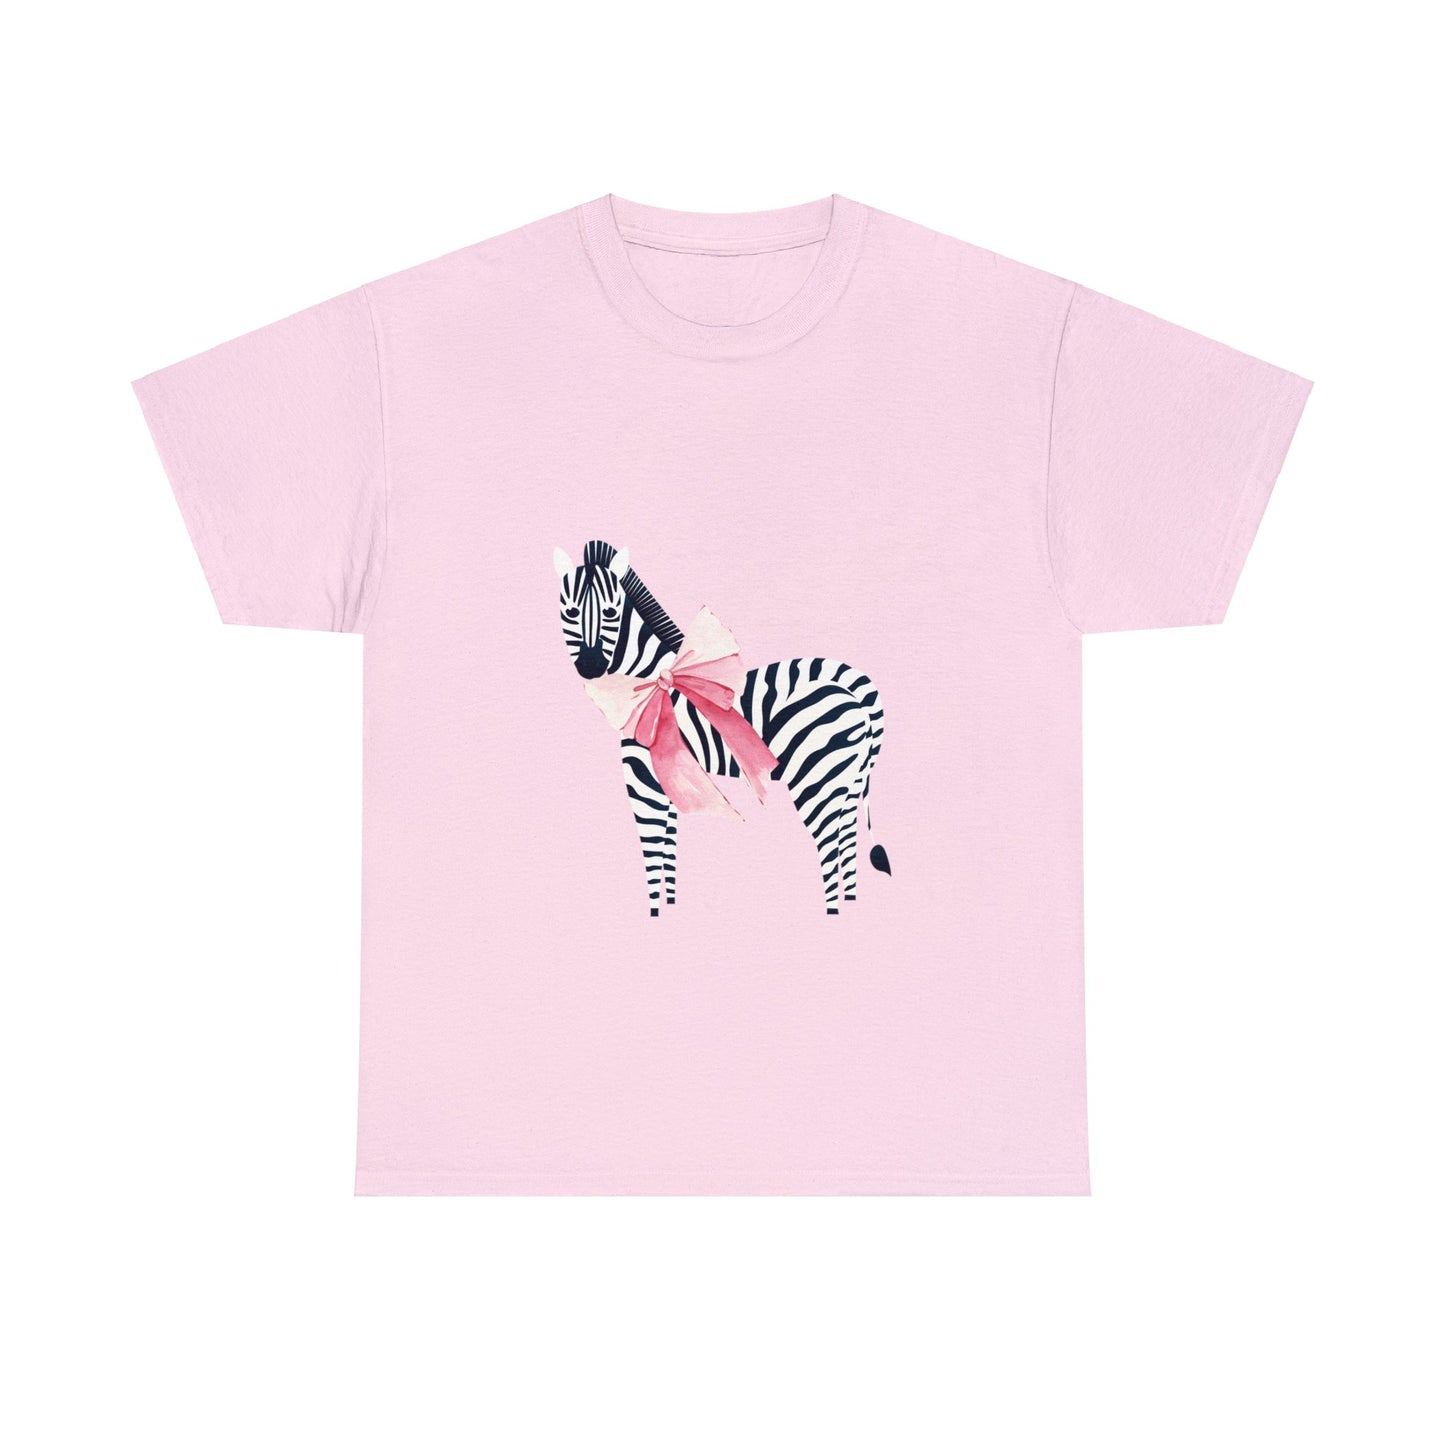 Zebra With Coquette Pink Bow Shirt